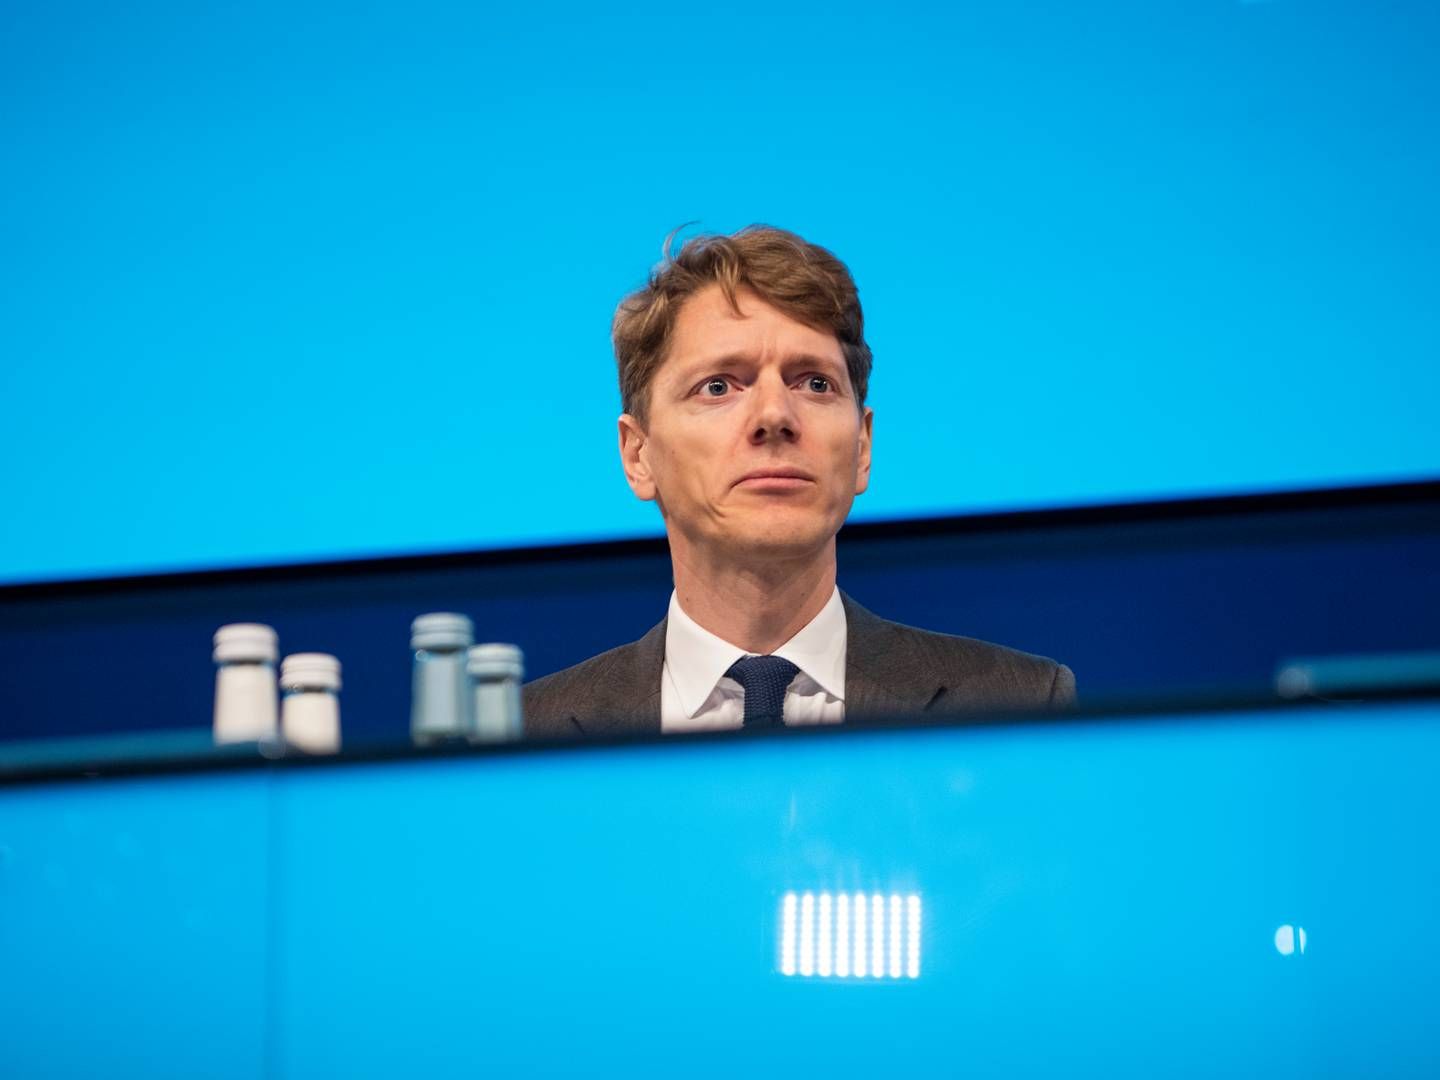 Maersk, which has Robert Maersk Uggla as chairman of the board, will now have to pay an extra tax bill stemming from the North Sea oil adventure initiated by Uggla's late grandfather, Maersk Mc-Kinney Moller. | Foto: Gregers Tycho